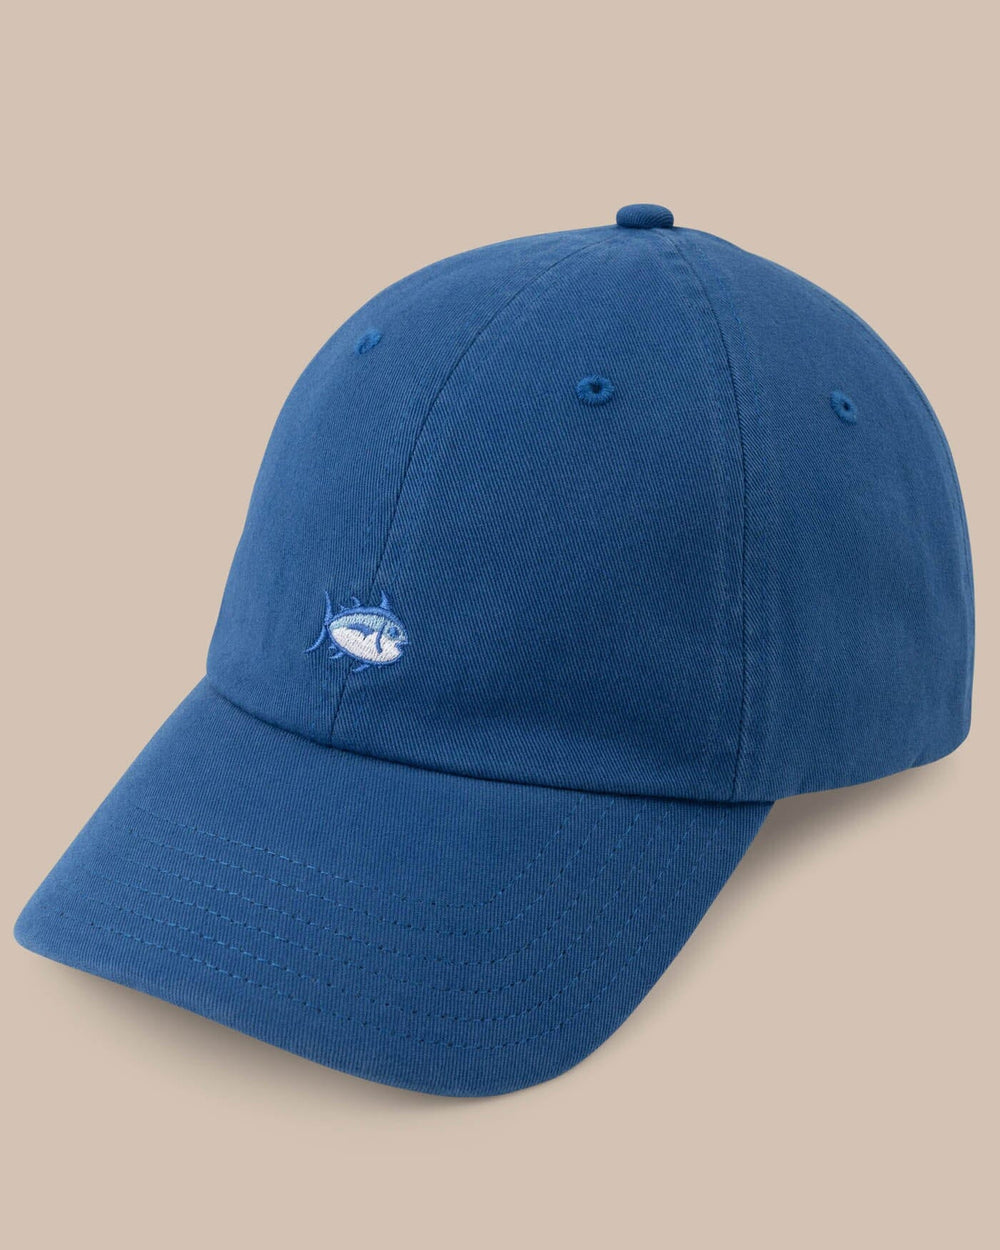 The front view of the Team Colors Skipjack Hat by Southern Tide - University Blue